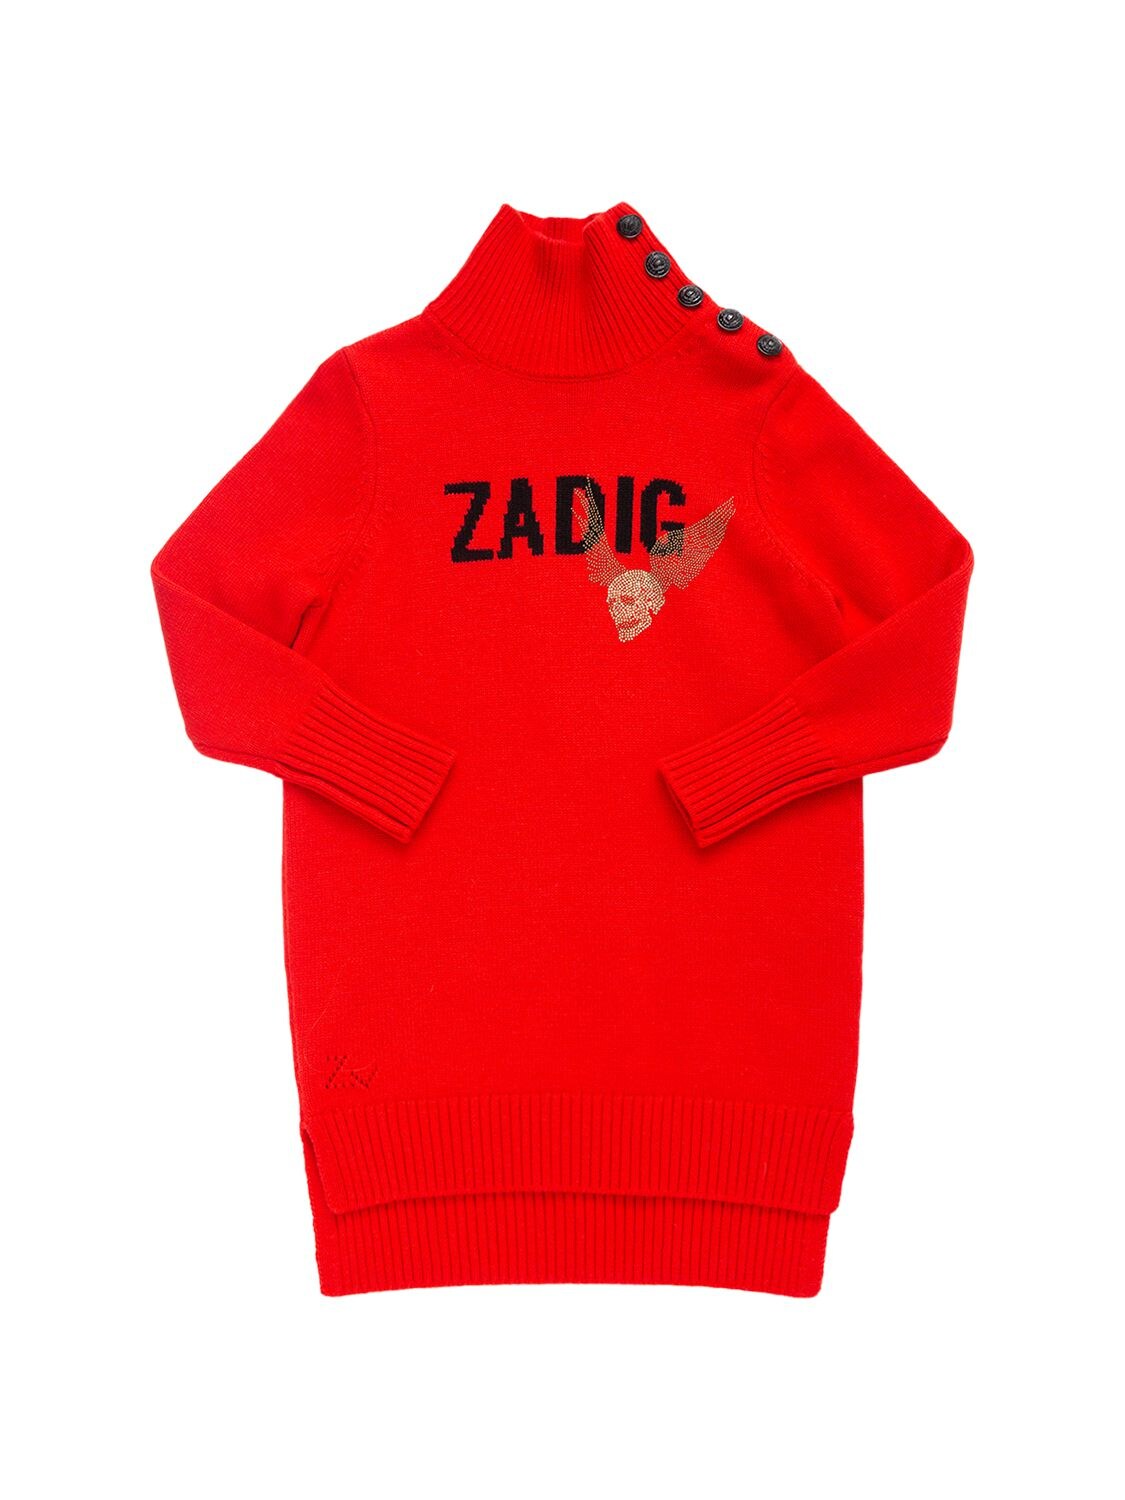 ZADIG & VOLTAIRE INTARSIA WOOL BLEND KNIT DRESS